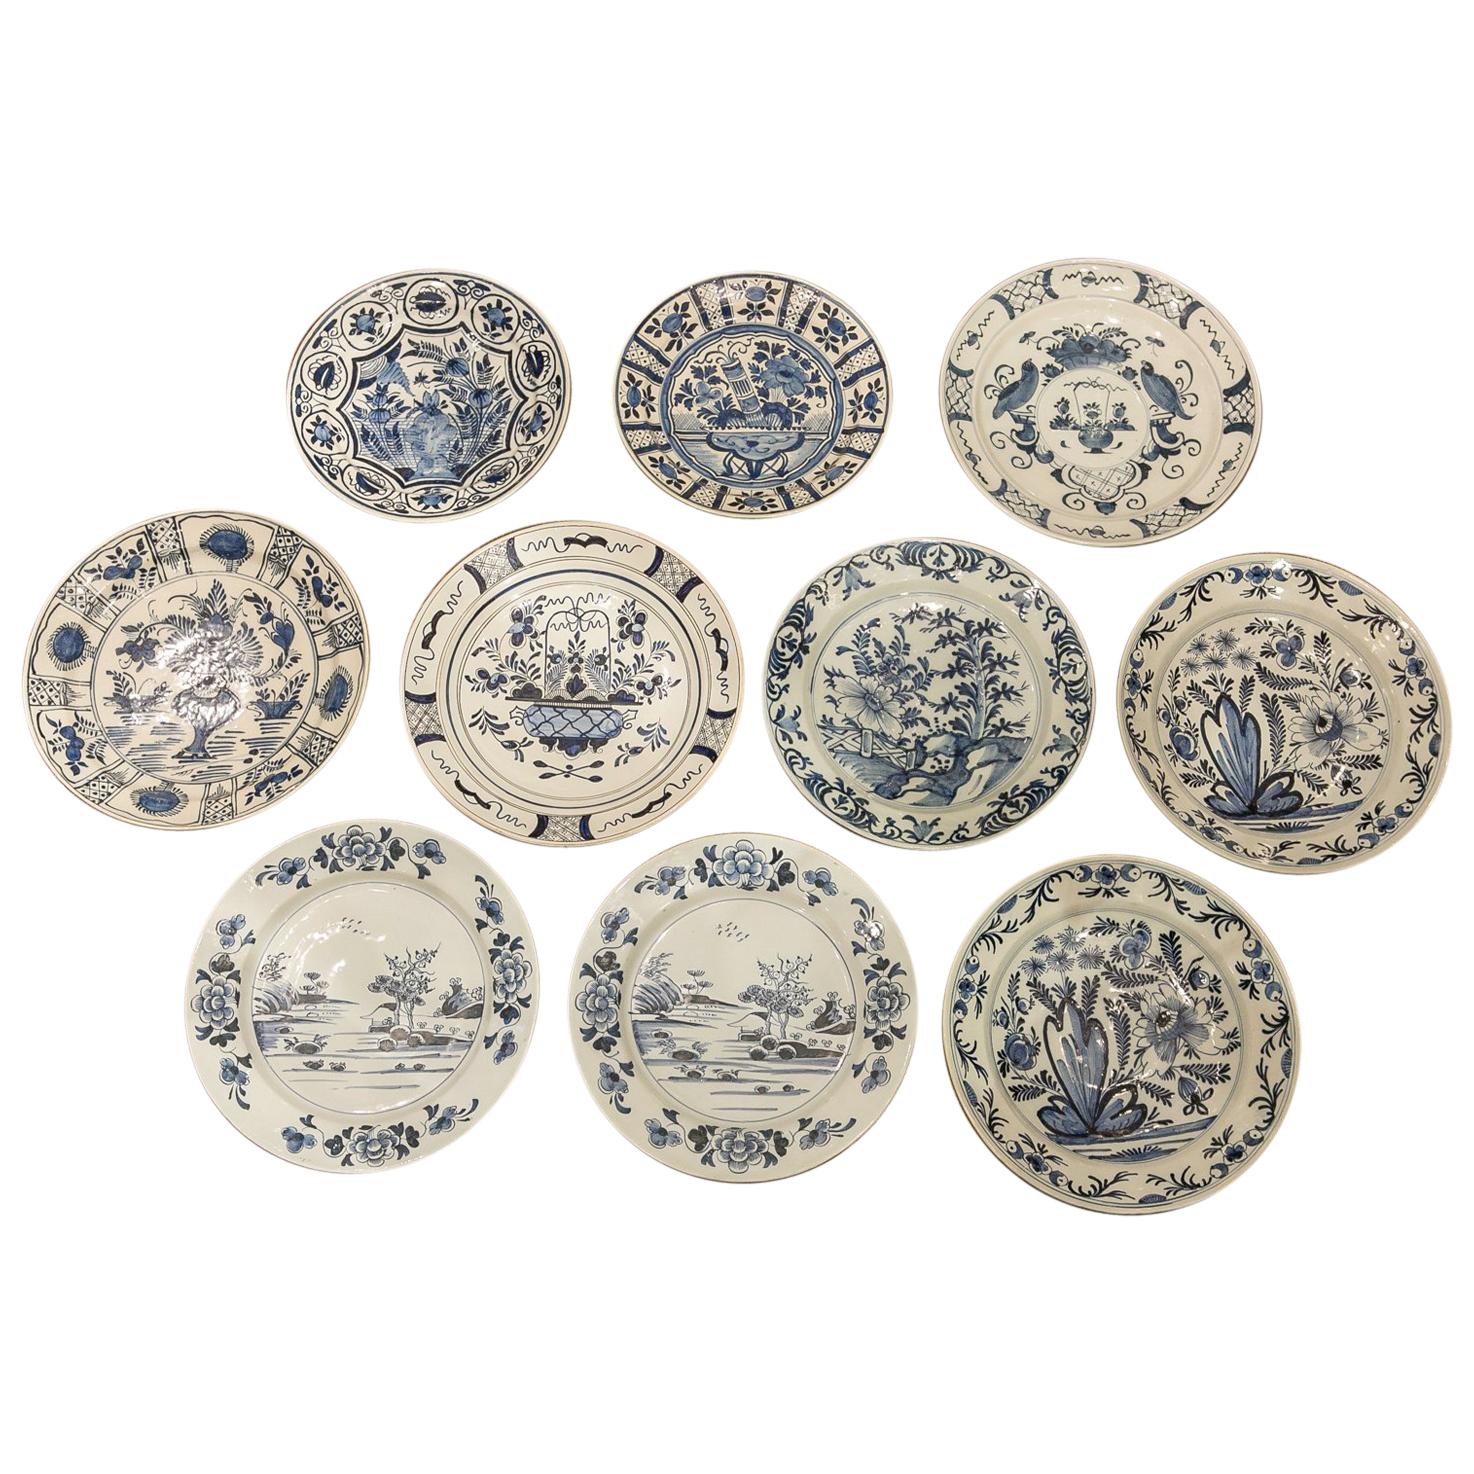 Ten Antique Large Delft Blue and White Chargers Late 18th Century